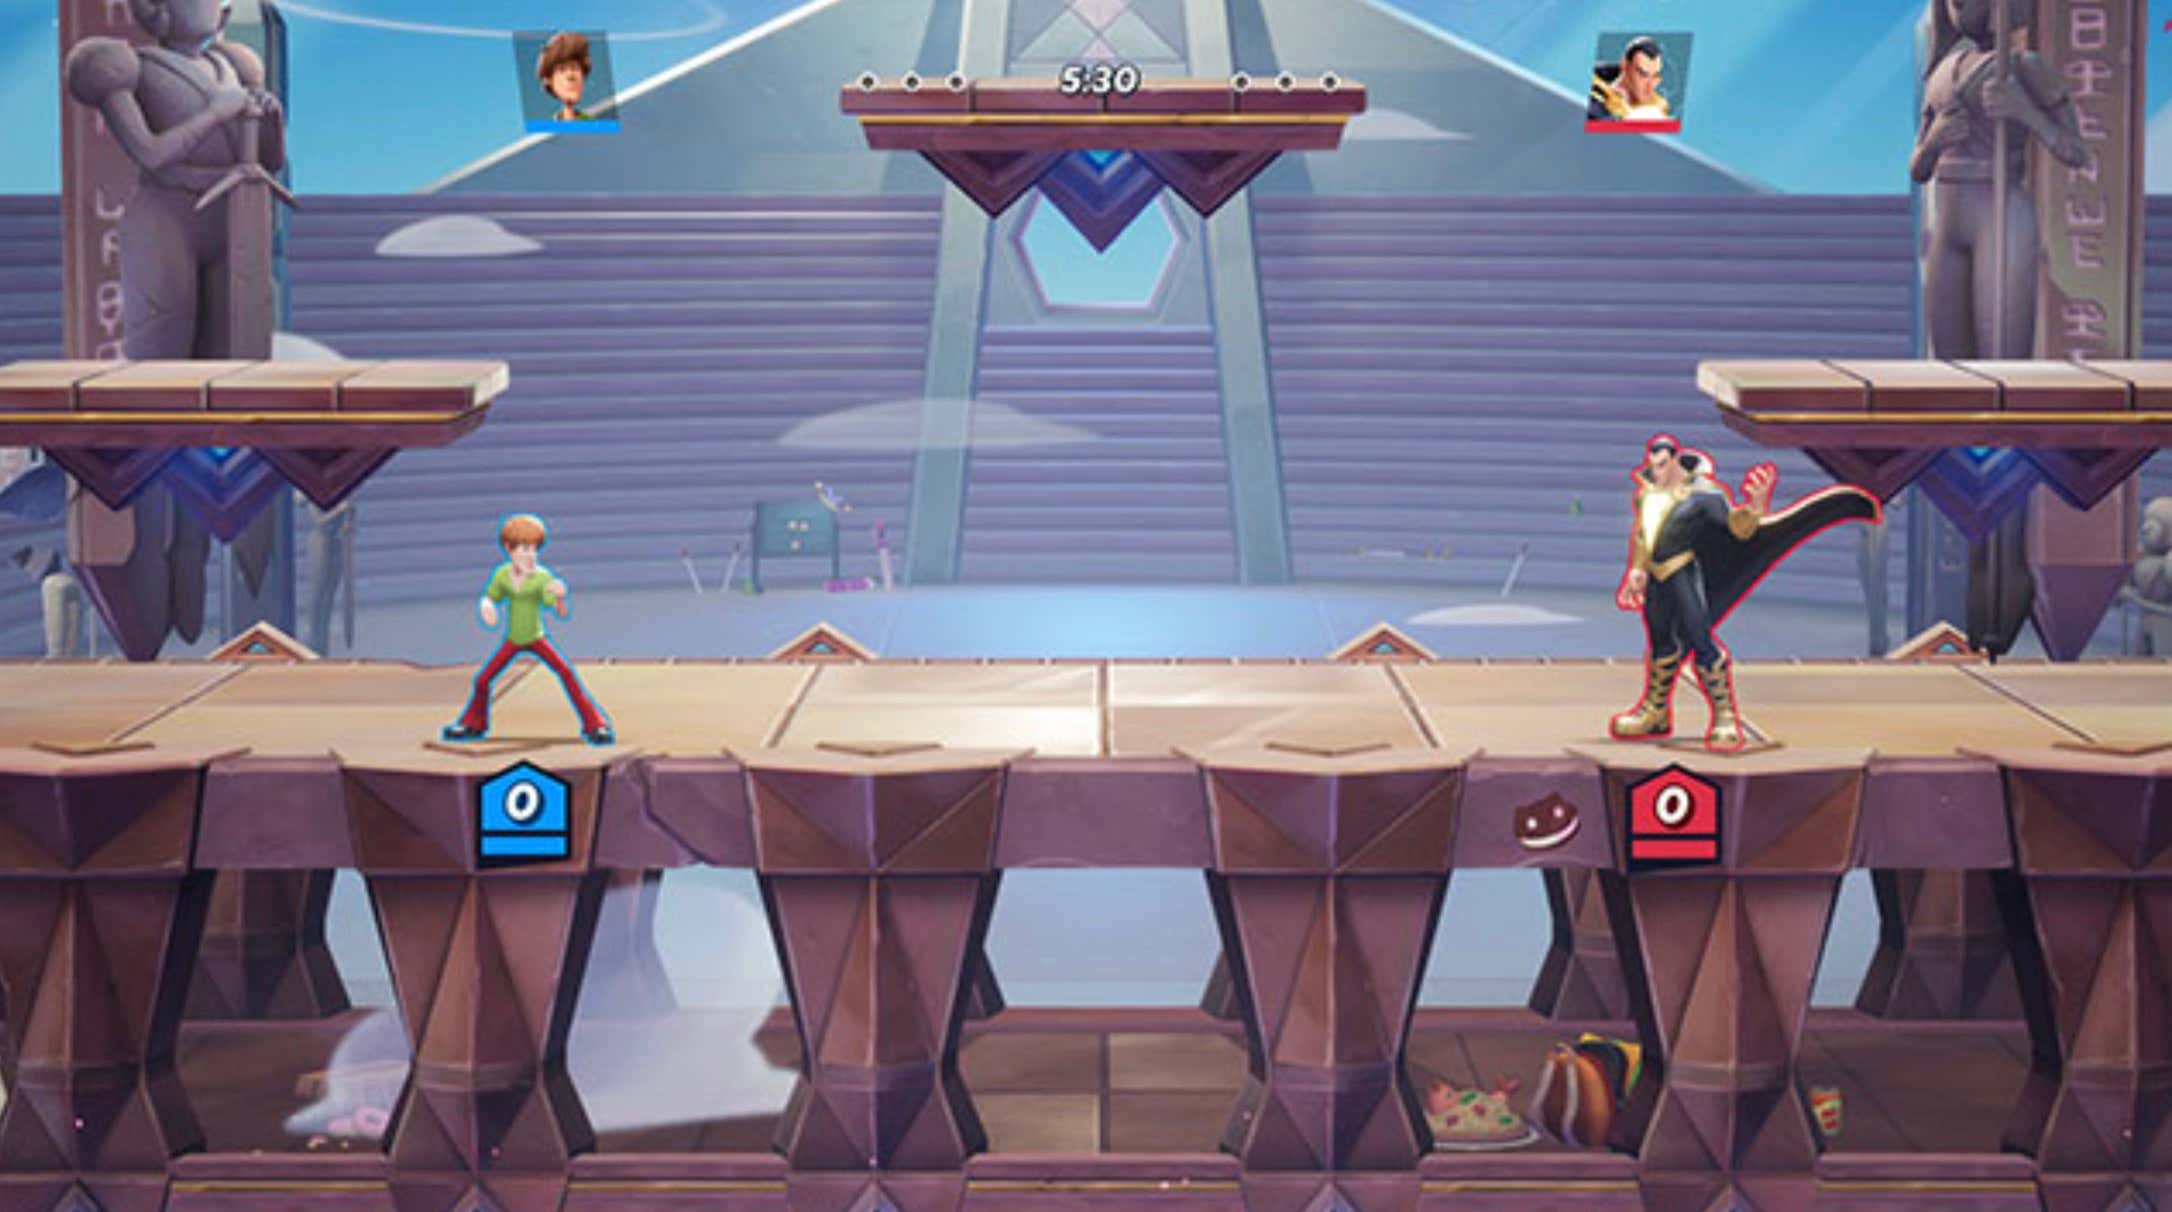 A "Before" Image showing a smaller Shaggy and Black Adam ready to fight in an MVS arena.